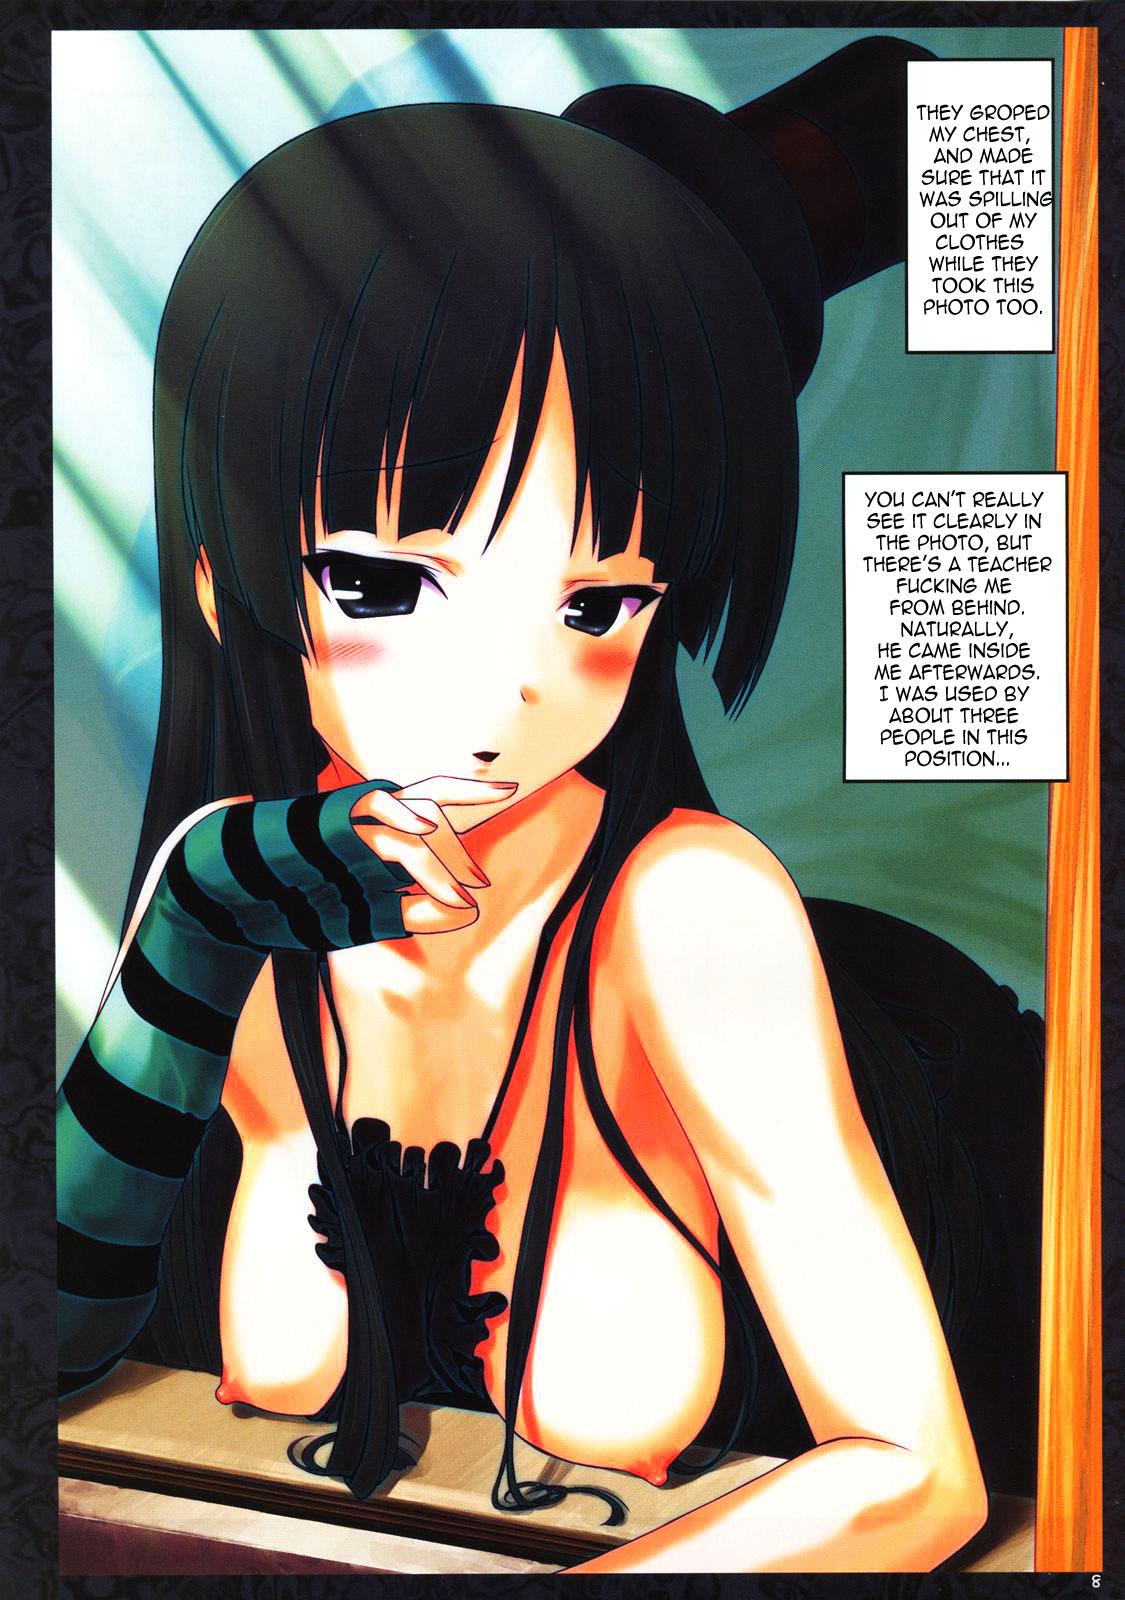 Dominant (C77) [Archives (Hechi)] Ura K-ON!! 2 | The Other K-ON!! 2 (K-ON!) [English] =LWB= - K on Roleplay - Page 8